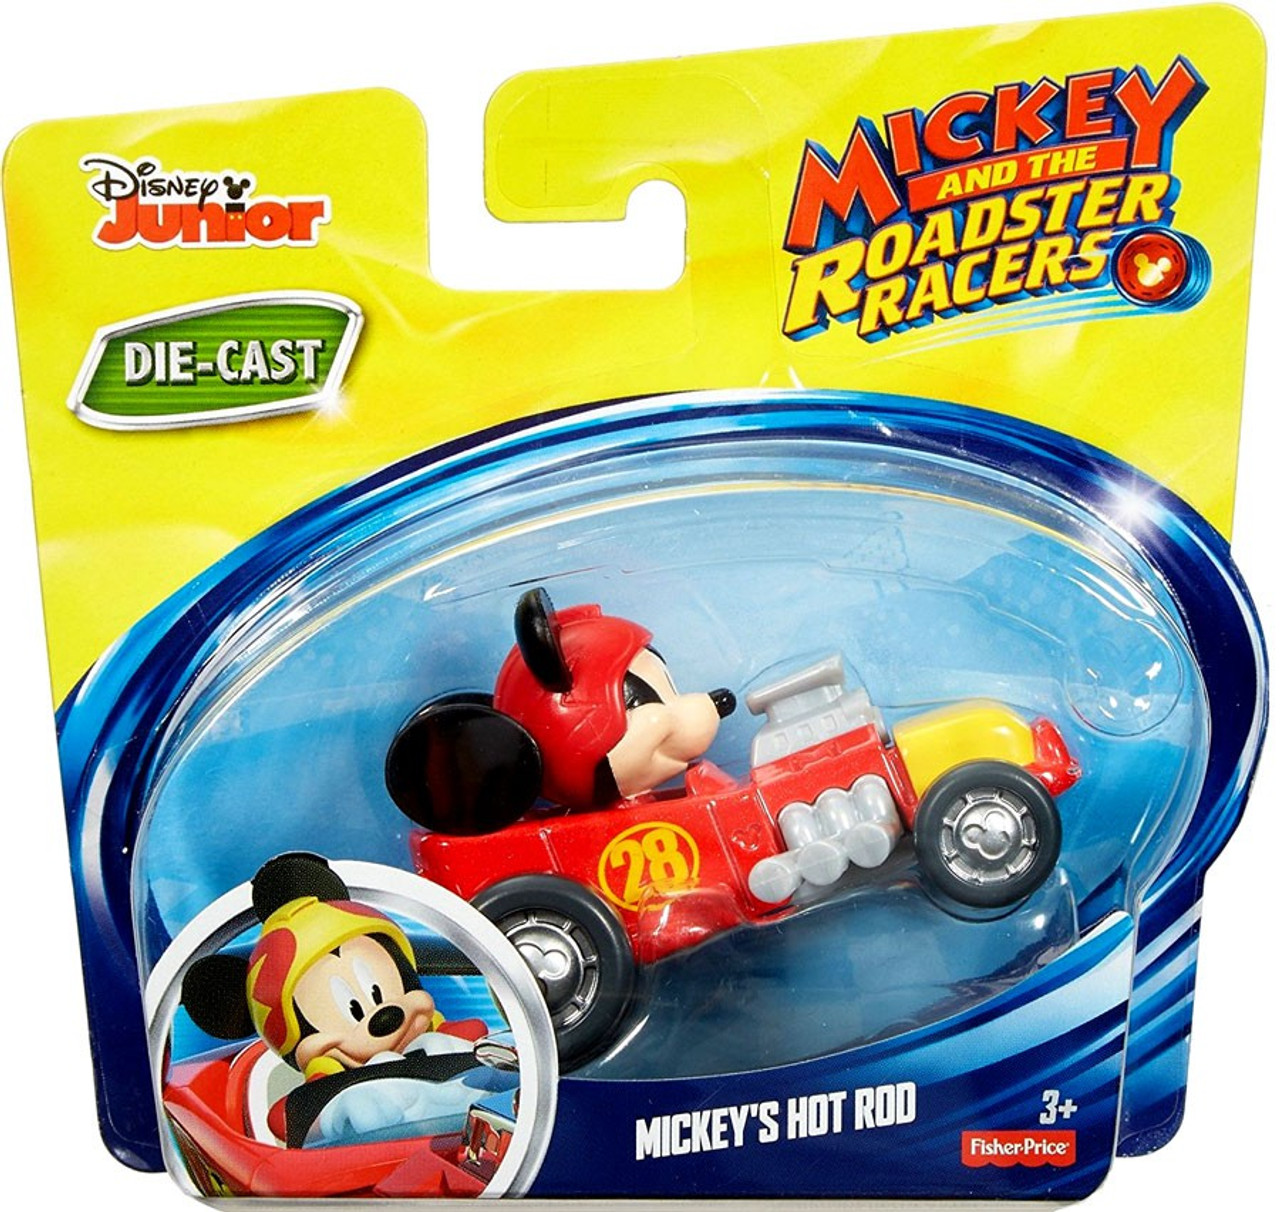 mickey and the roadster racers die cast cars